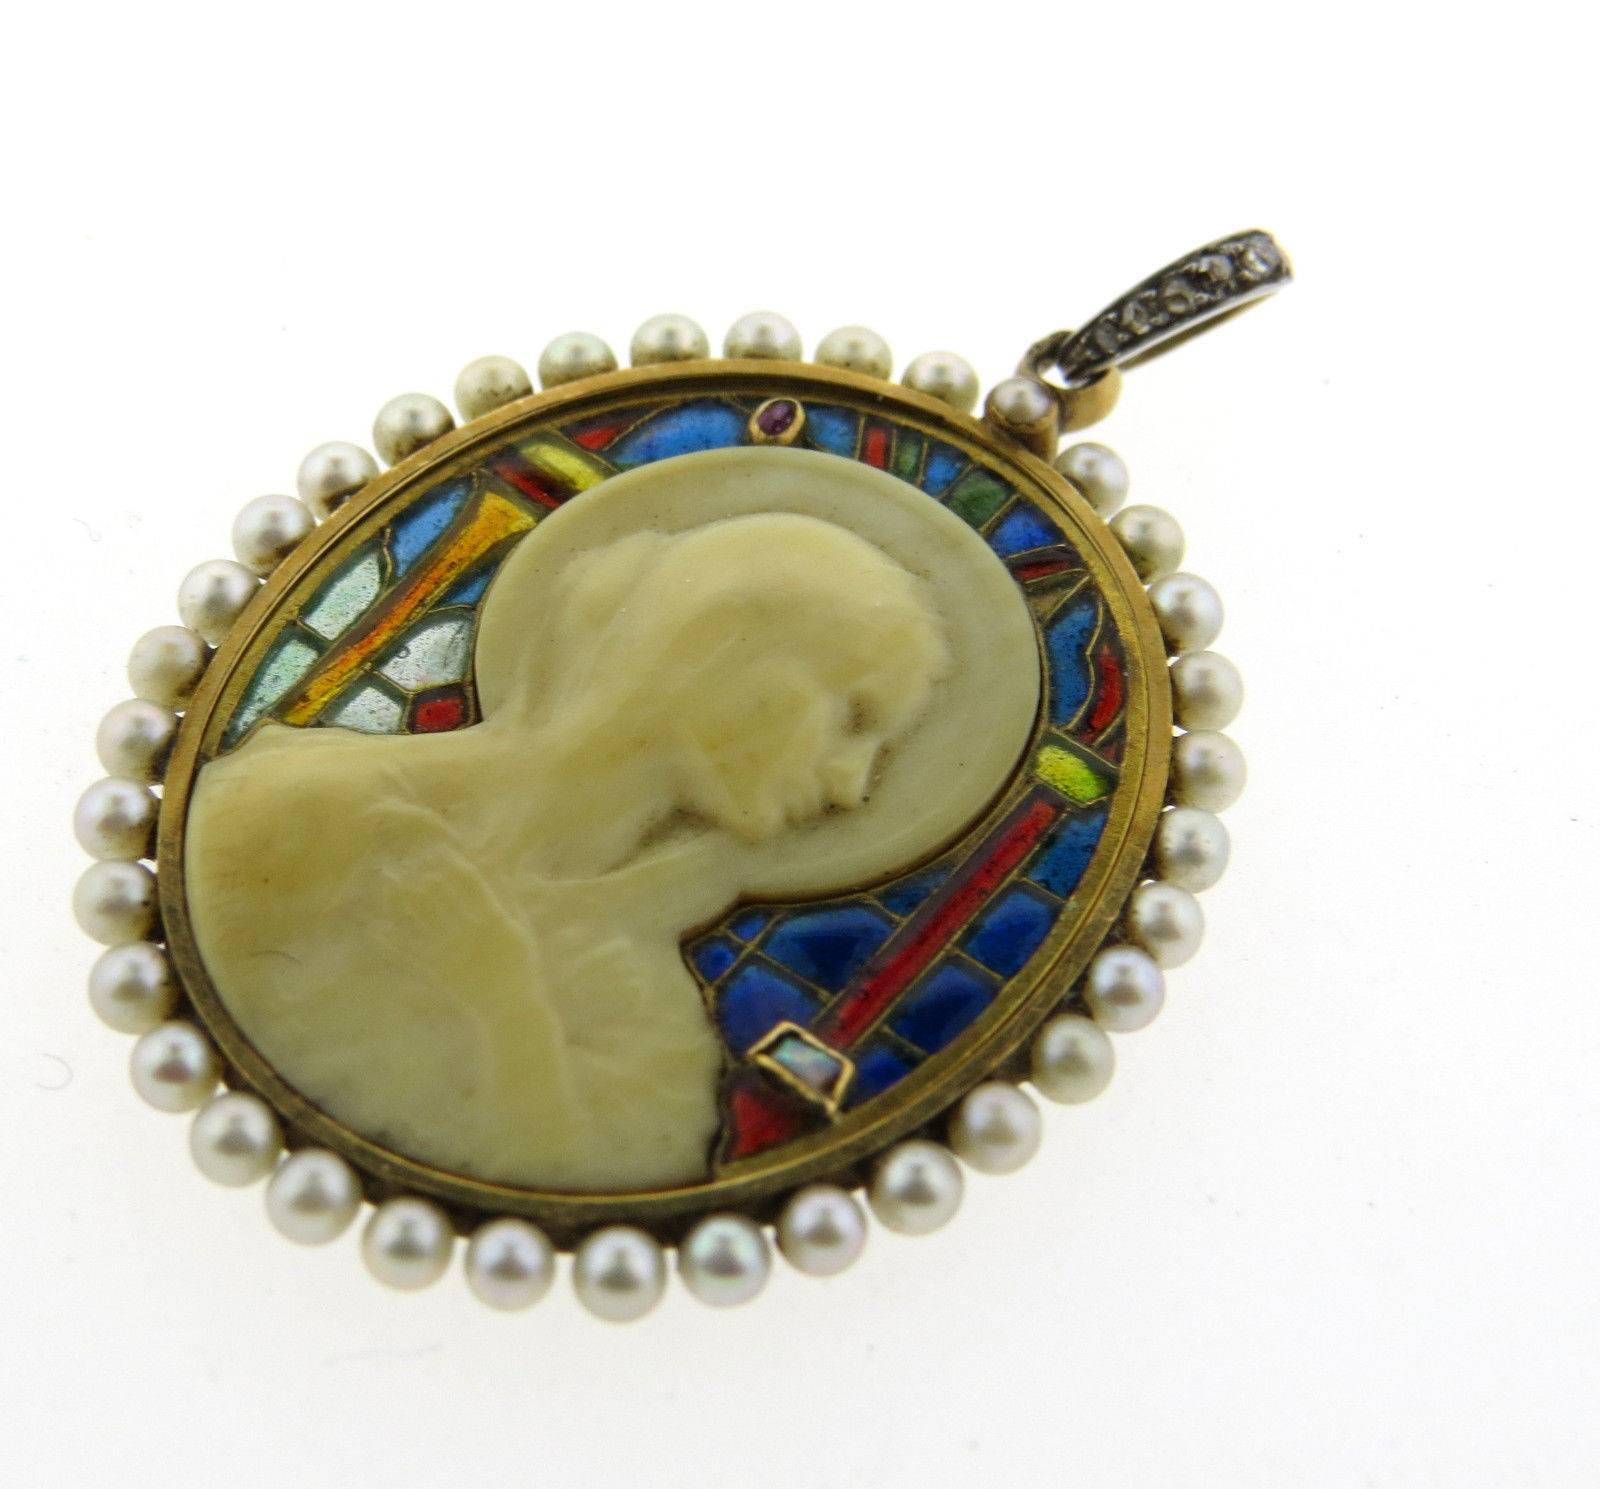 An 18k gold plique a jour pendant depicting Madonna, set with rose cut diamonds and pearls. The pendant is 31mm x 26mm, with bale pendant is 40mm long. Marked: 4374.  The weight of the piece is	5.2 grams.